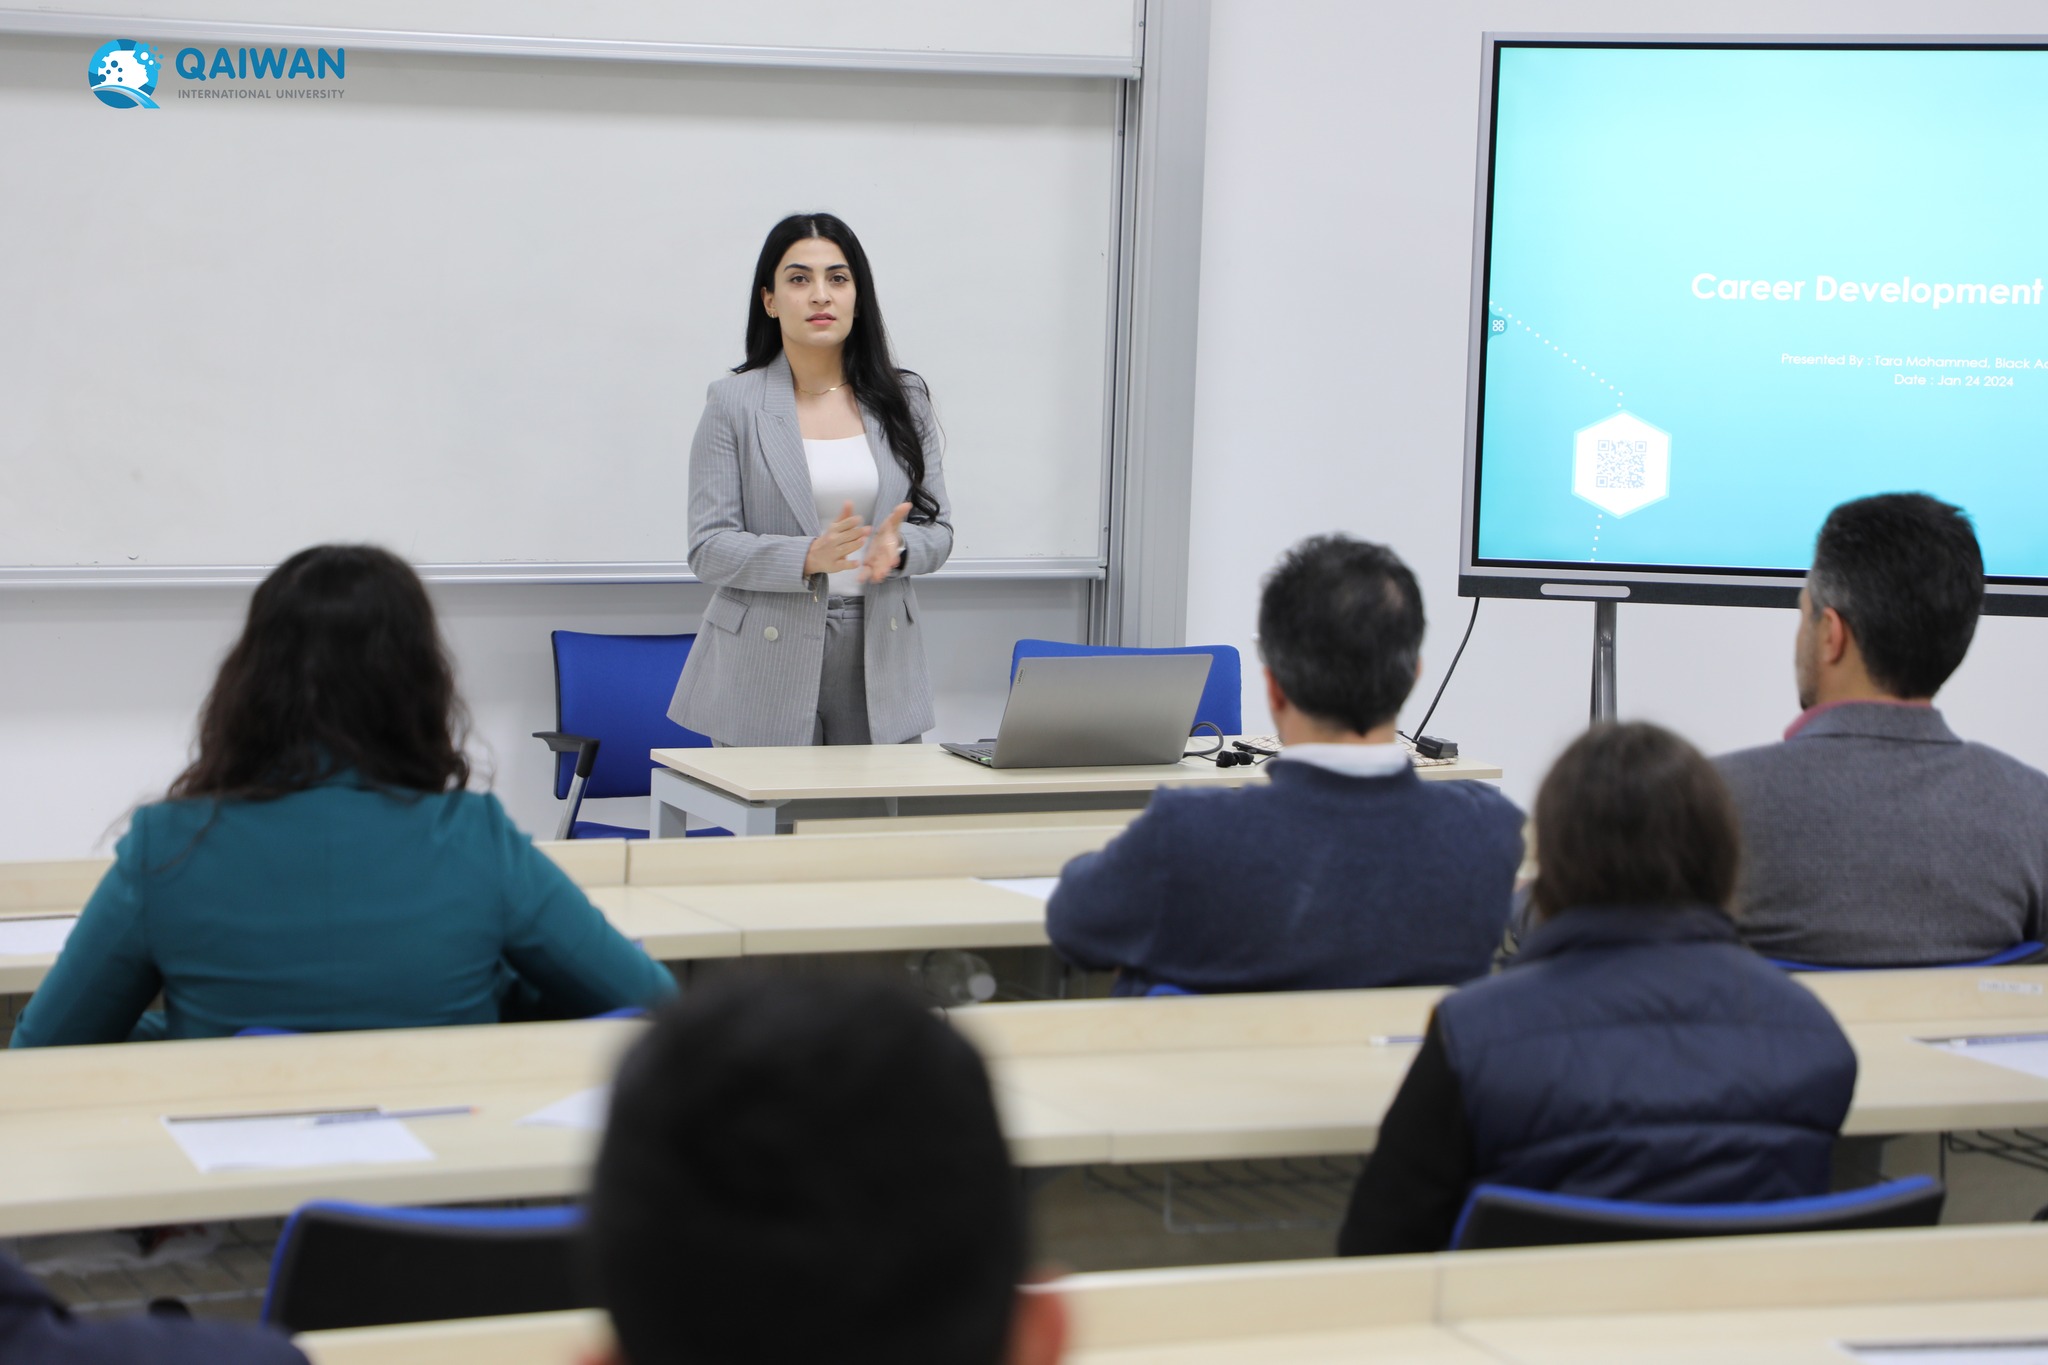 A seminar about "the Software Market in the (KRG)" was held by Ms. Tara Mohammed